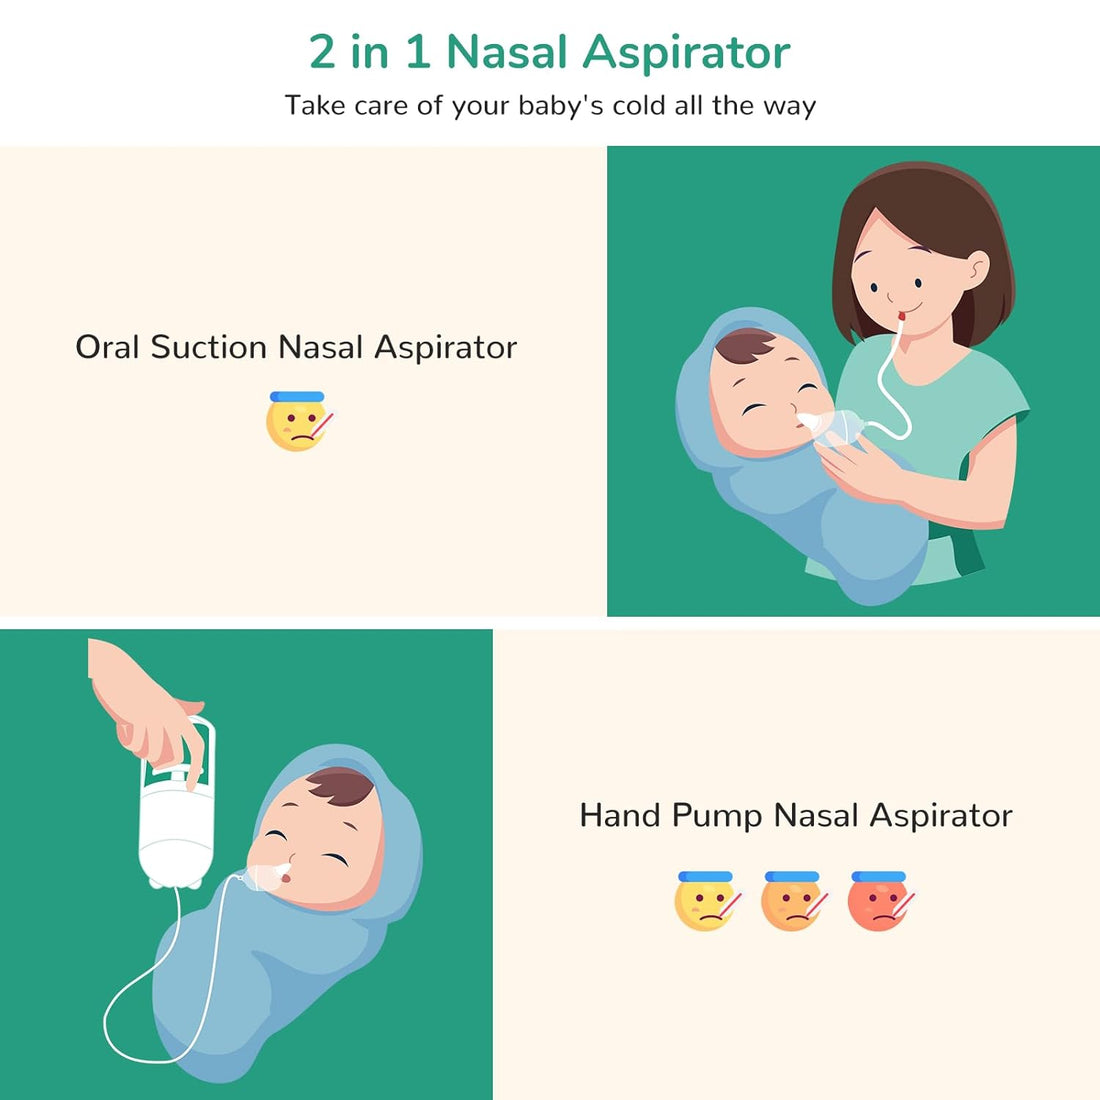 GROWNSY Nasal Aspirator for Baby, Hand Pump ＆ Oral Suction 2 in 1 Baby Nasal Aspirator and Baby Nose Sucker, with 30 Hygiene Filters and a Convenient Storage Travel Case